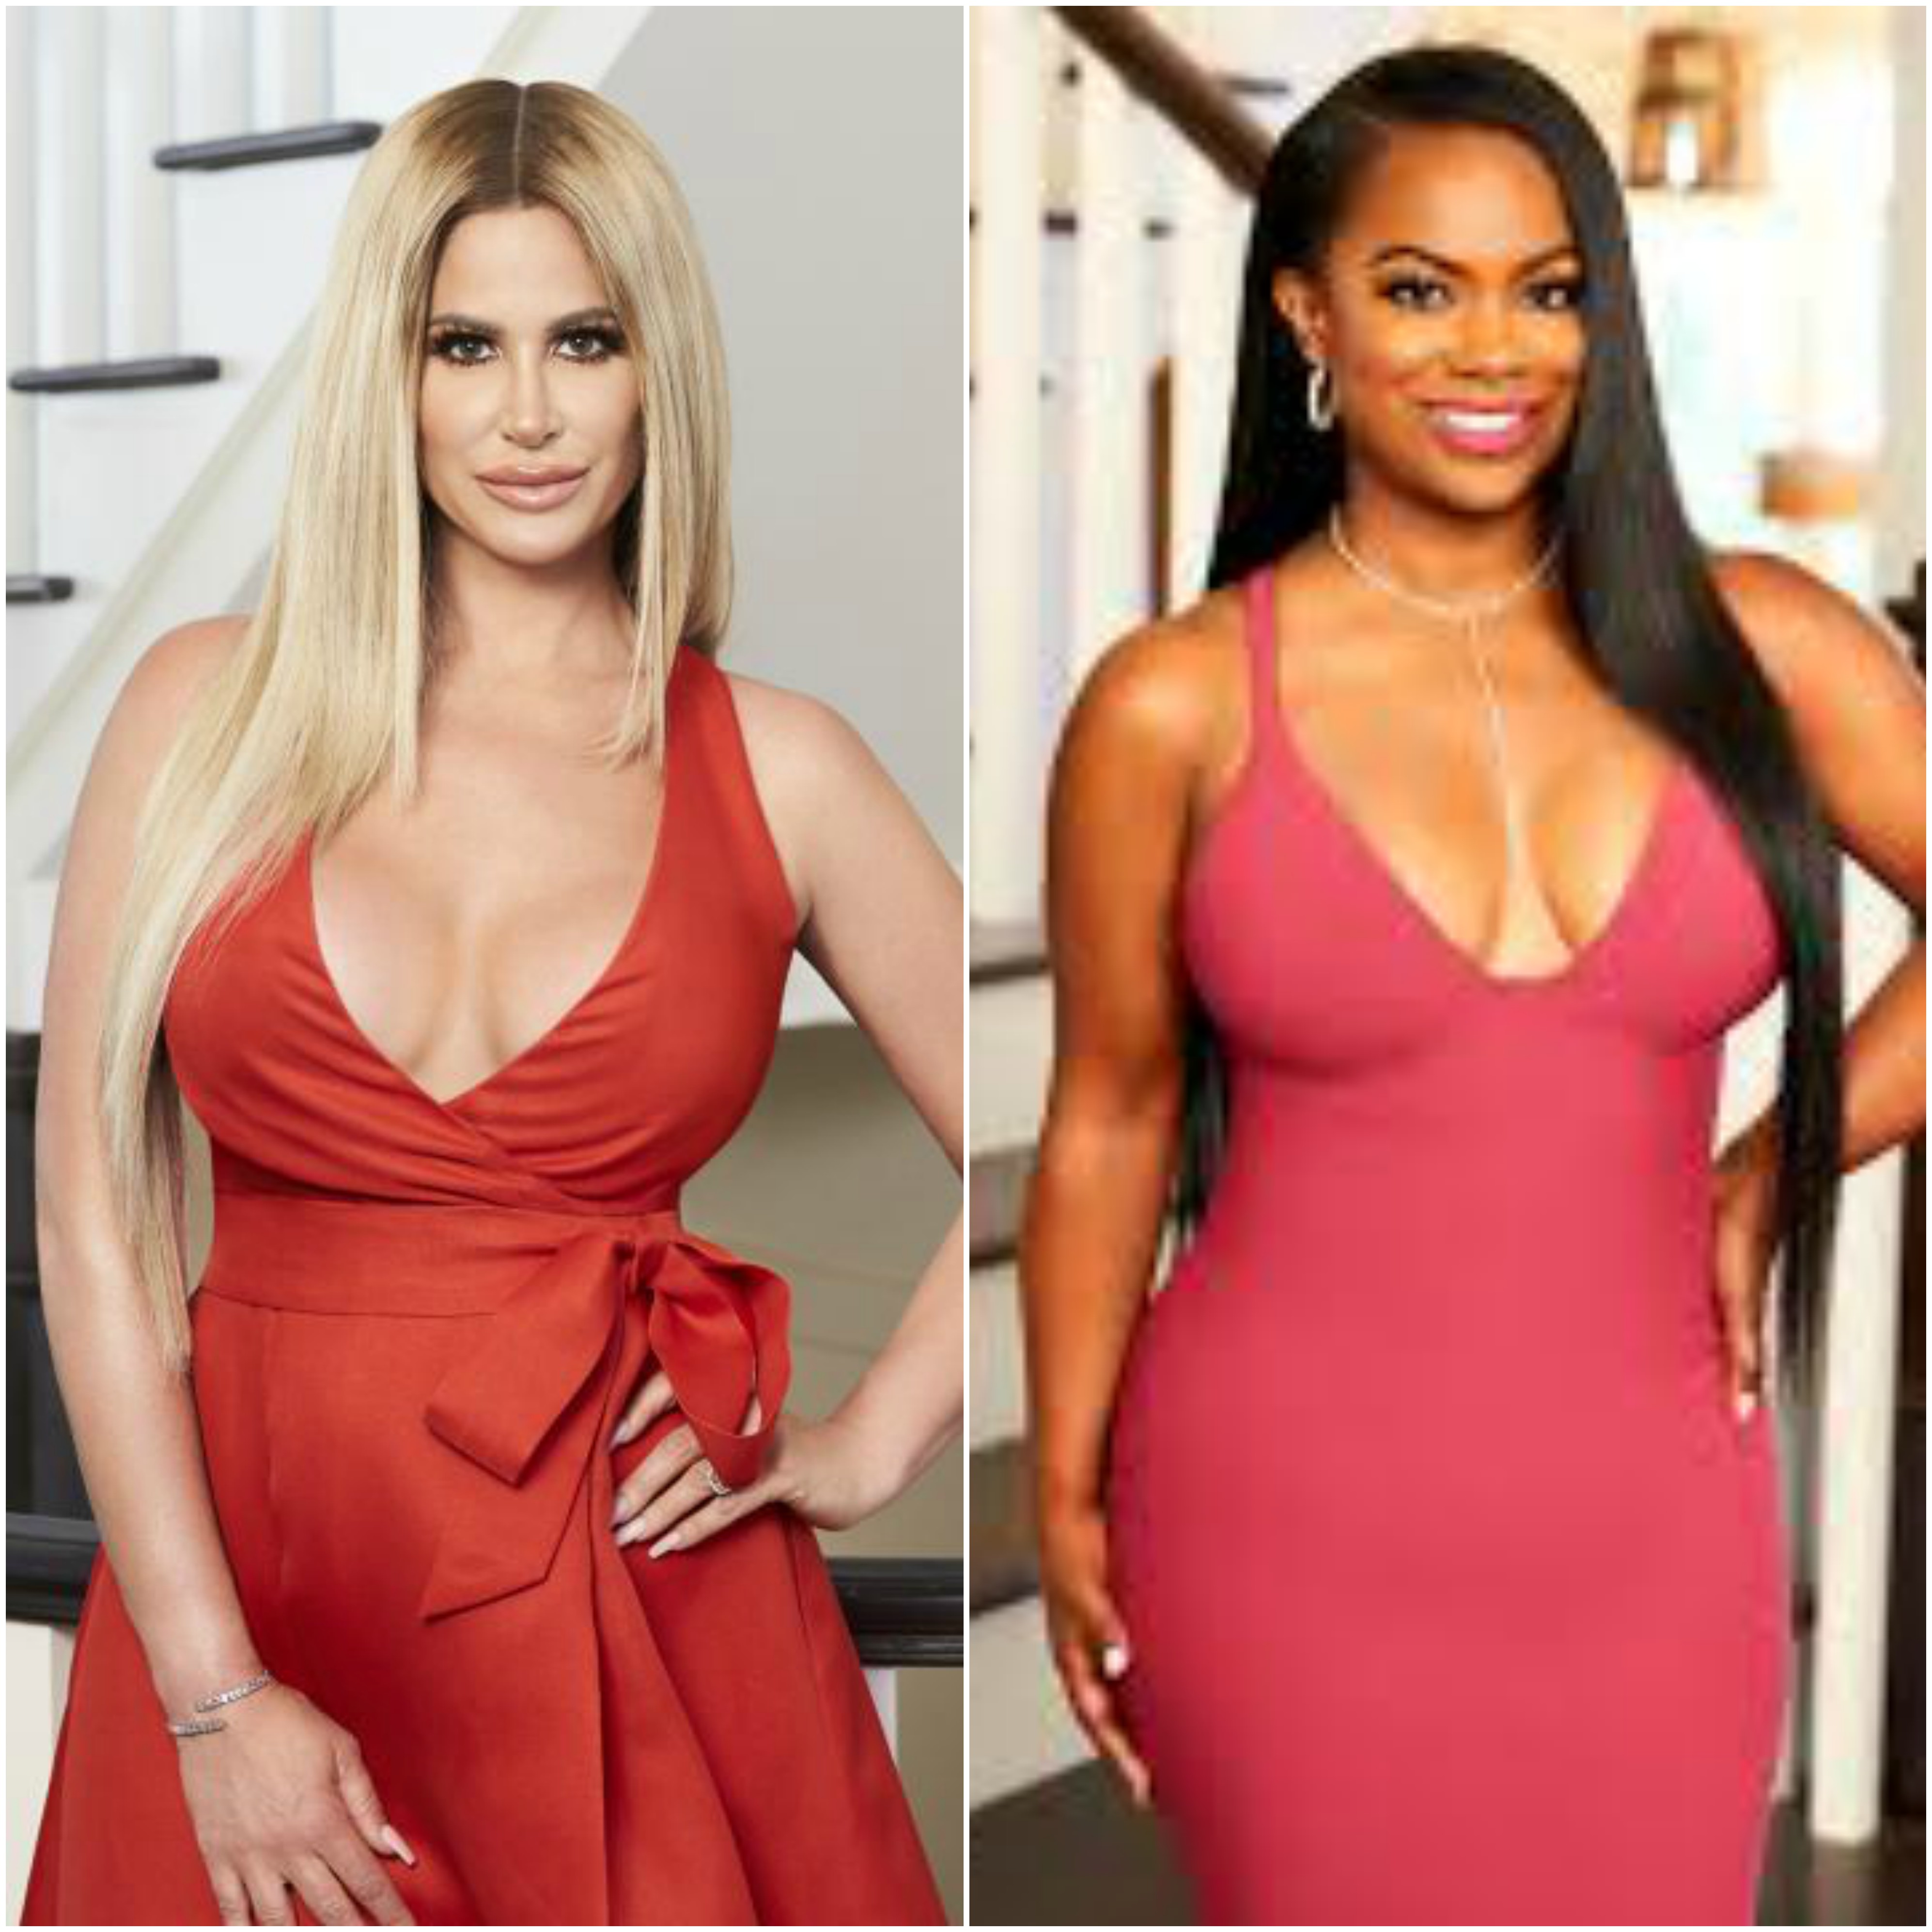 Must See Kandi Burruss and Kim Zolciak Biermann Face Off on Twitter Over Fresh Lesbian/Swinger Accusations picture